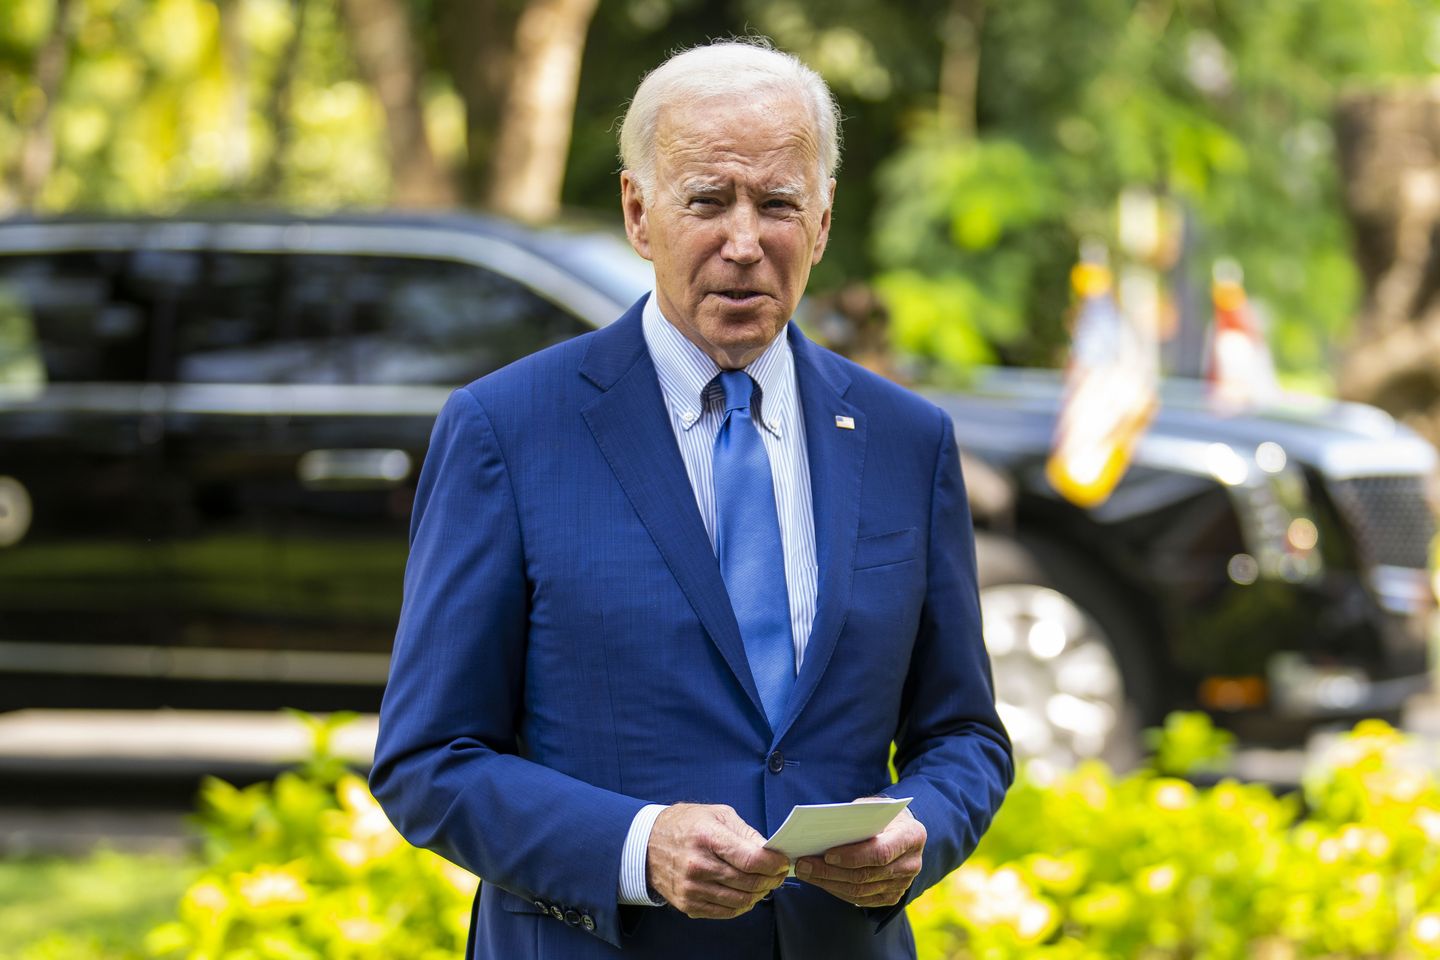 Joe Biden: 'Unlikely' explosions in Poland caused by missiles fired from Russia